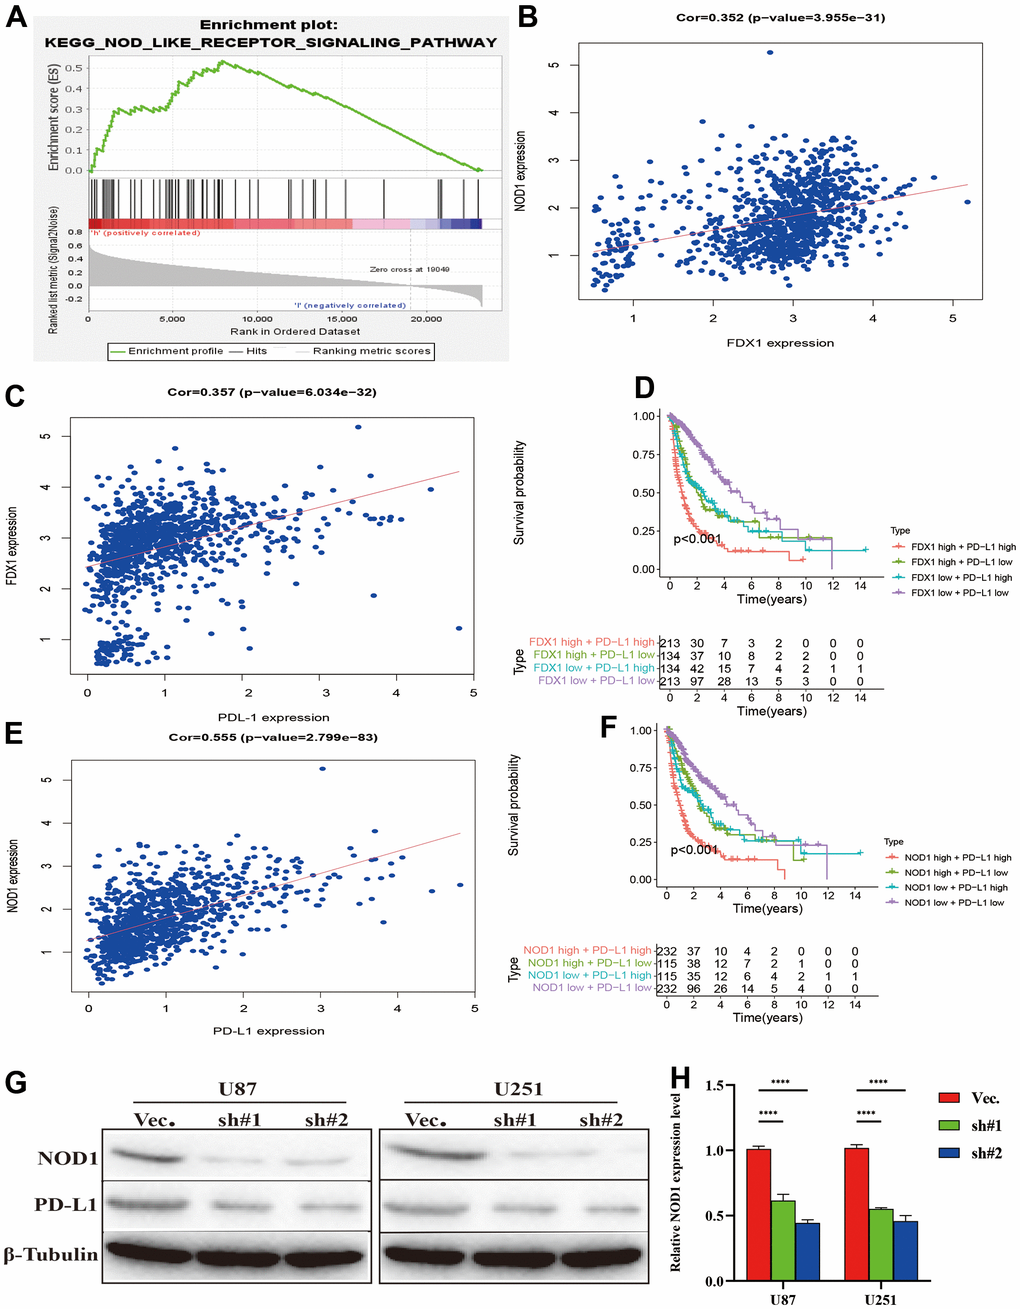 Silencing FDX1 inhibits PD-L1 expression. (A) GSEA indicates that the NOD-like receptor signaling pathway is positively enriched with high FDX1 expression. (B, C) FDX1 expression is positively associated with NOD1 and PD-L1. (D) FDX1 and PDL1 co-expression confers poorest survival outcomes. (E) NOD1 expression is positively associated with PD-L1. (F) NOD1 and PDL1 co-expression confers the poorest survival outcomes. (G) Western blot indicates that NOD1 and PD-L1 are inhibited after FDX1 silencing. (H) qRT-PCR shows low NOD1 expression after FDX1 silencing.